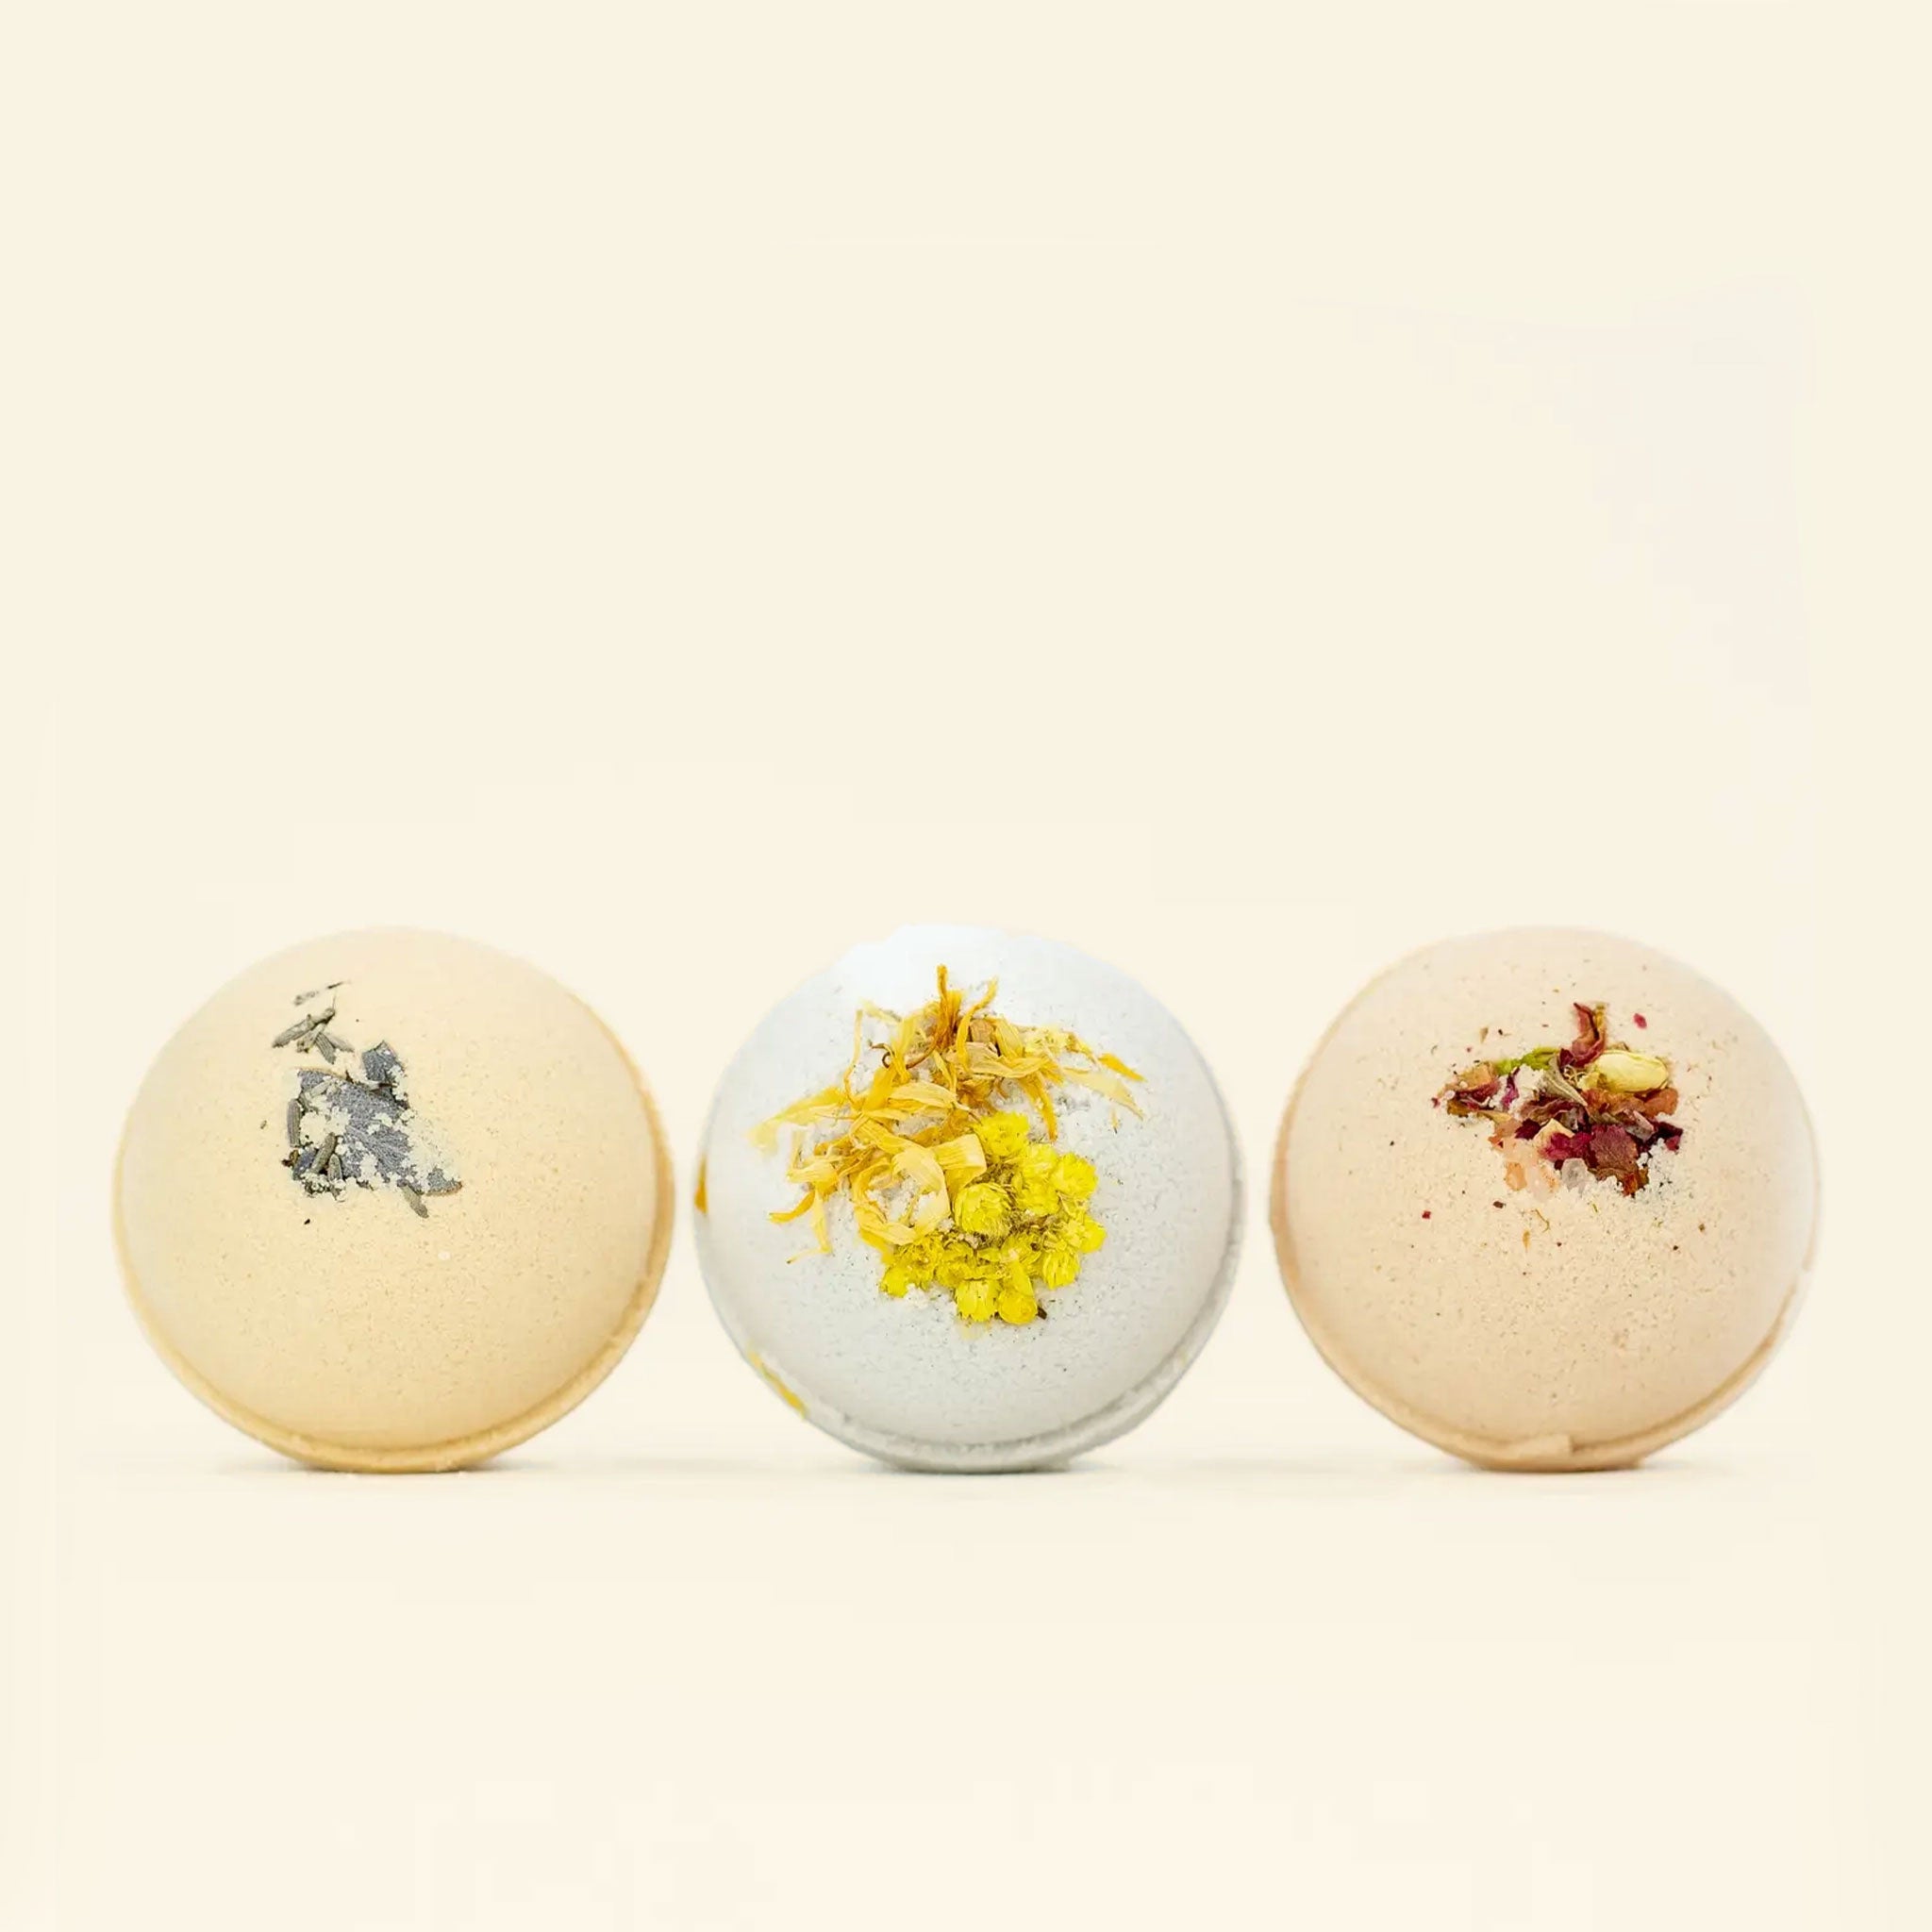 On a neutral background is three different scents of bath bombs.